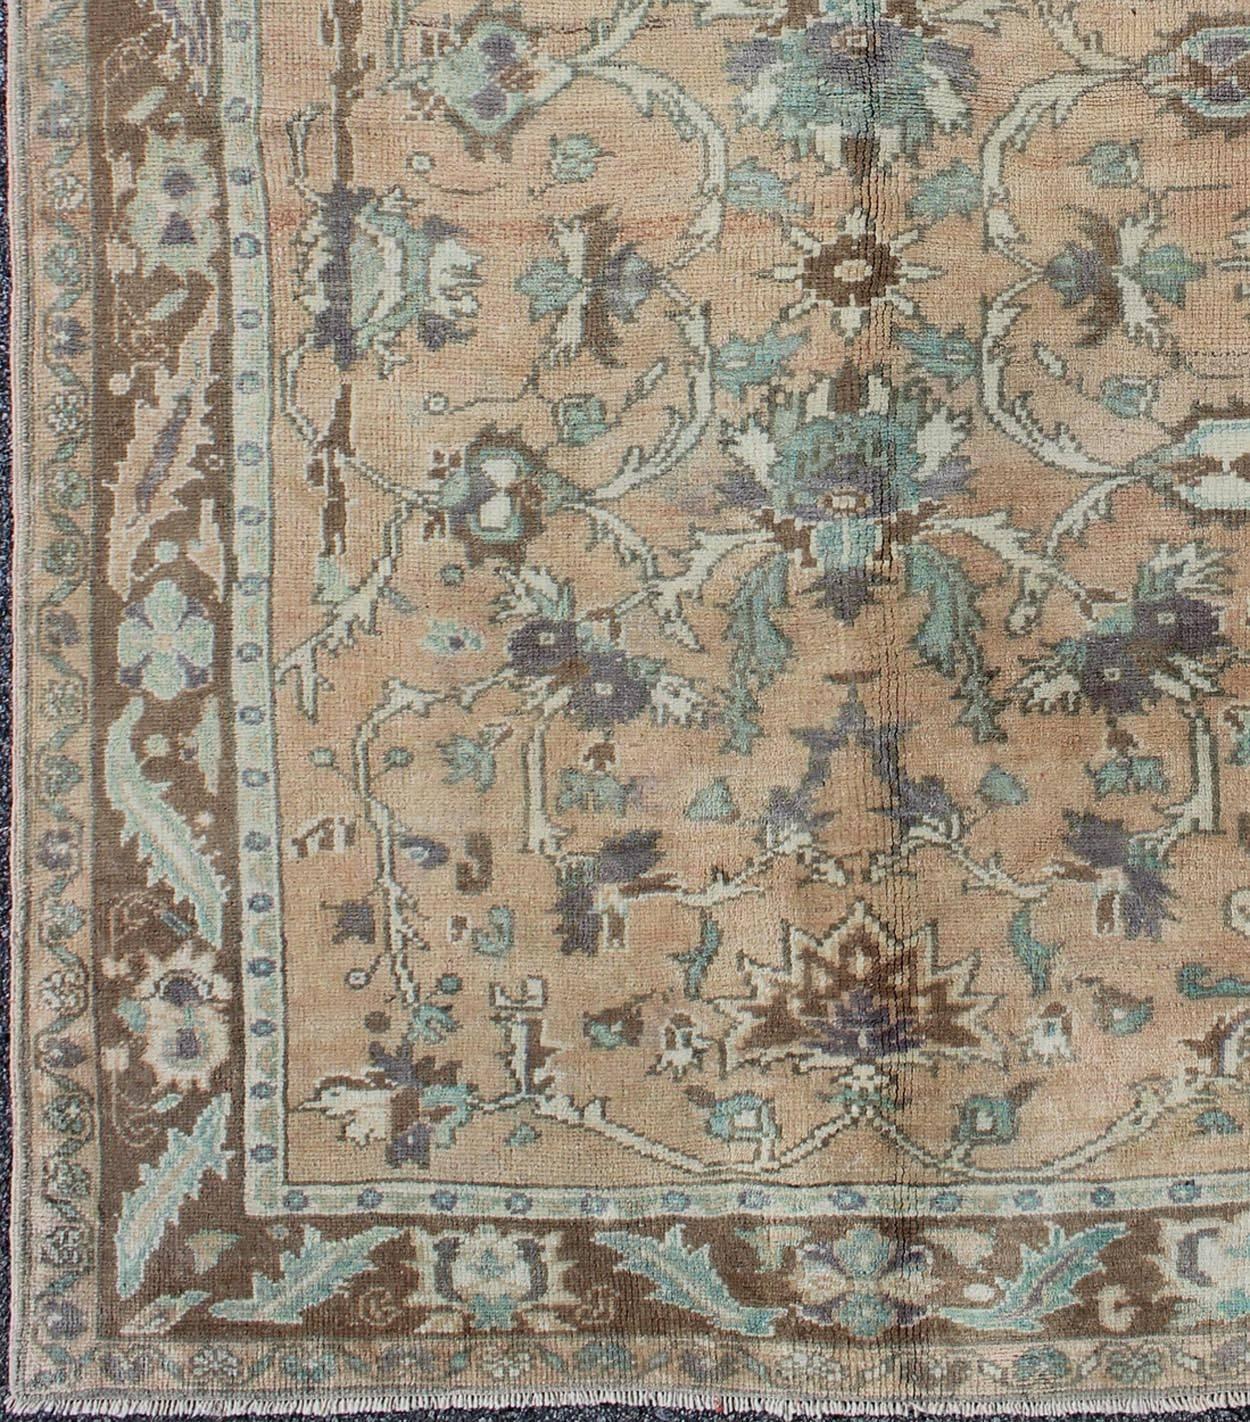 Elegant floral vintage Turkish Oushak rug in cream, green, peach, and brown, rug enc-4090, country of origin / type: Turkey / Oushak, circa 1930

The design of this beautiful vintage Oushak rug from Turkey and neutral color palette, punctuated with